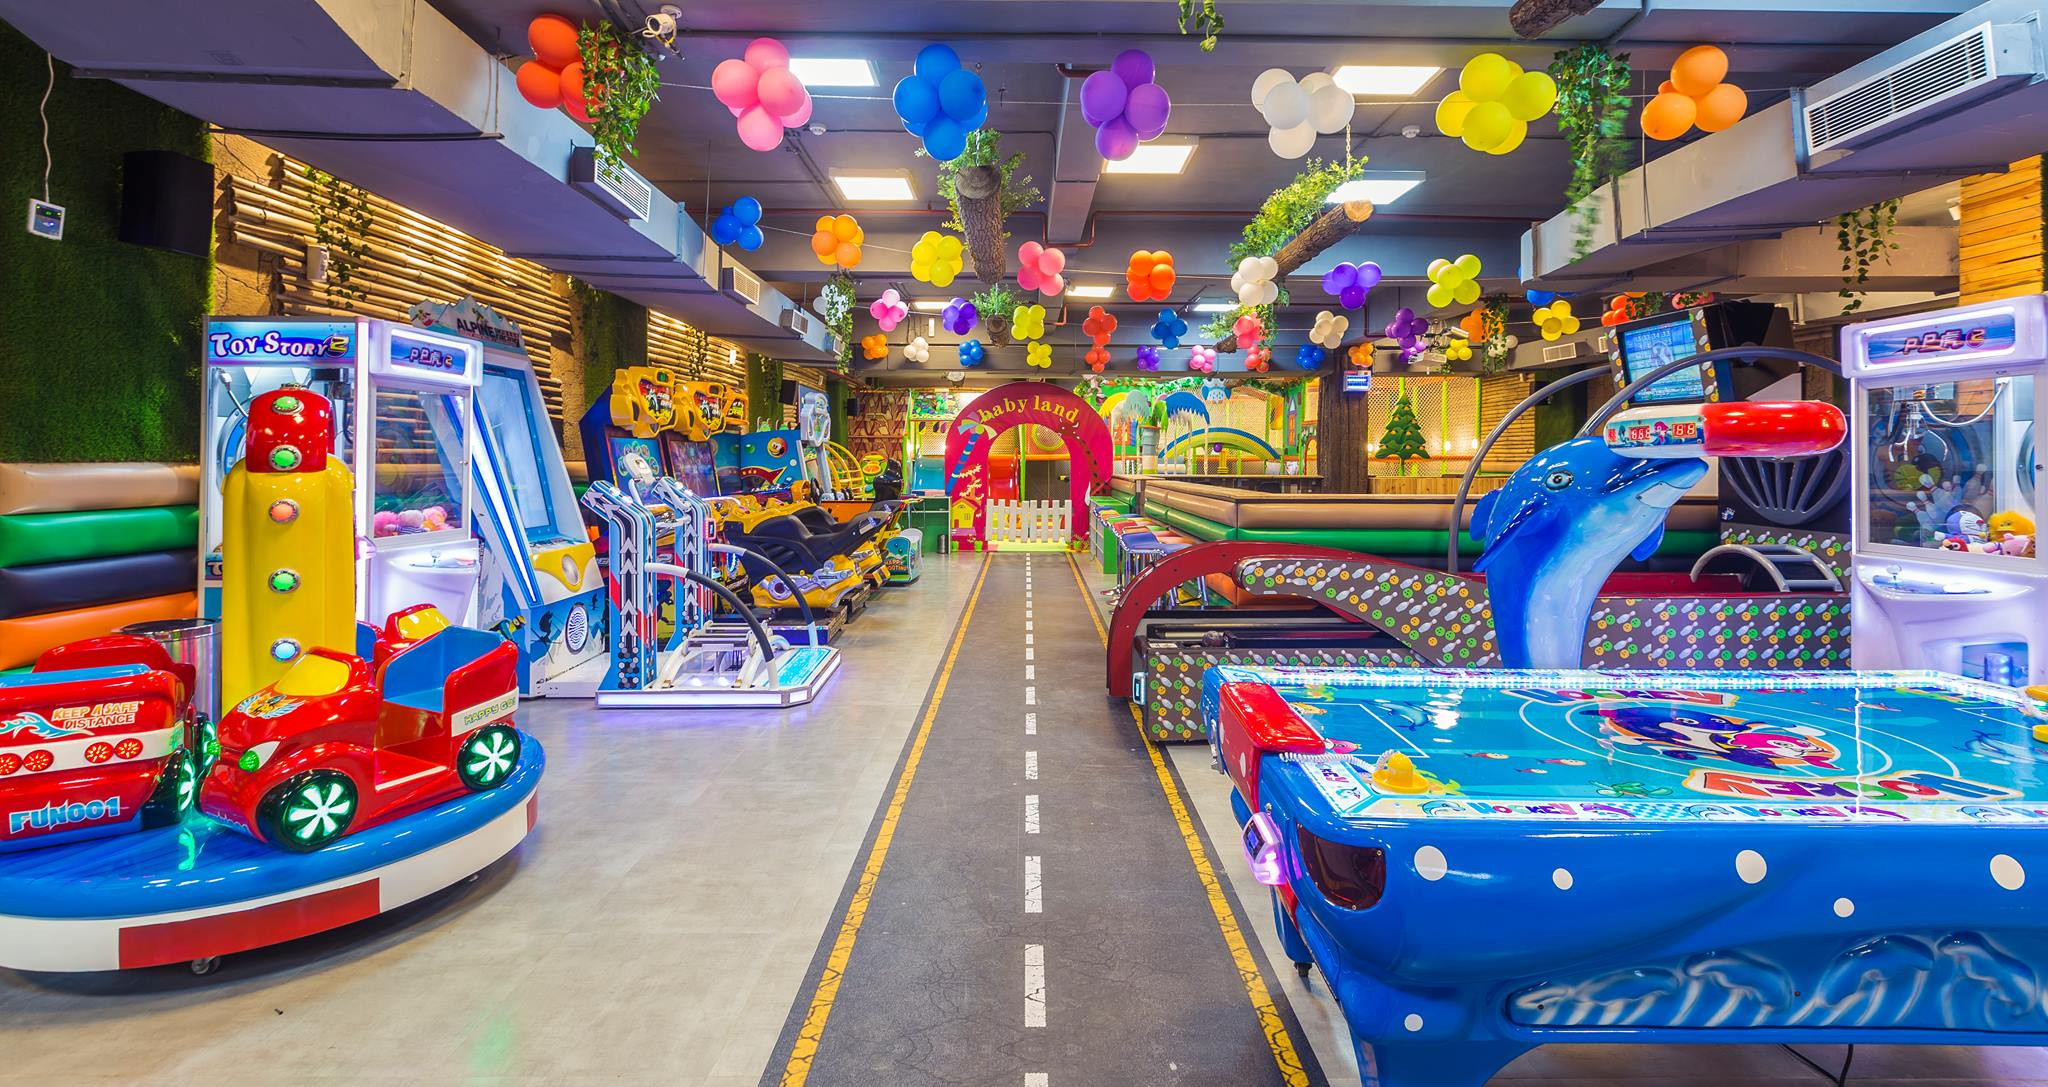 Fun Indoor Places For Kids
 Kids Entertainment Zone for Kids Fun Indoor Places for